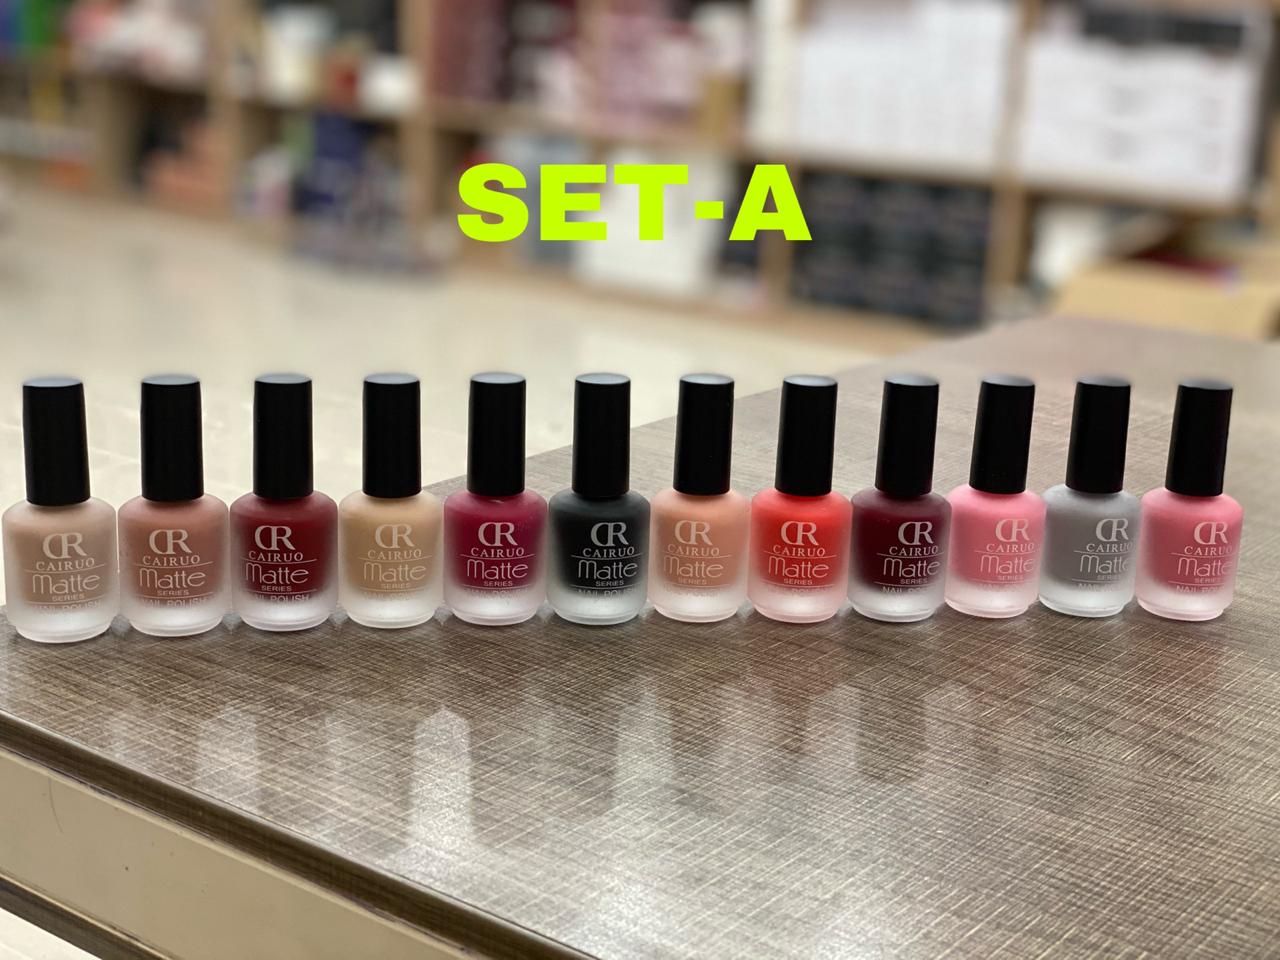 CR Matte Nails Polish Pack Of 12